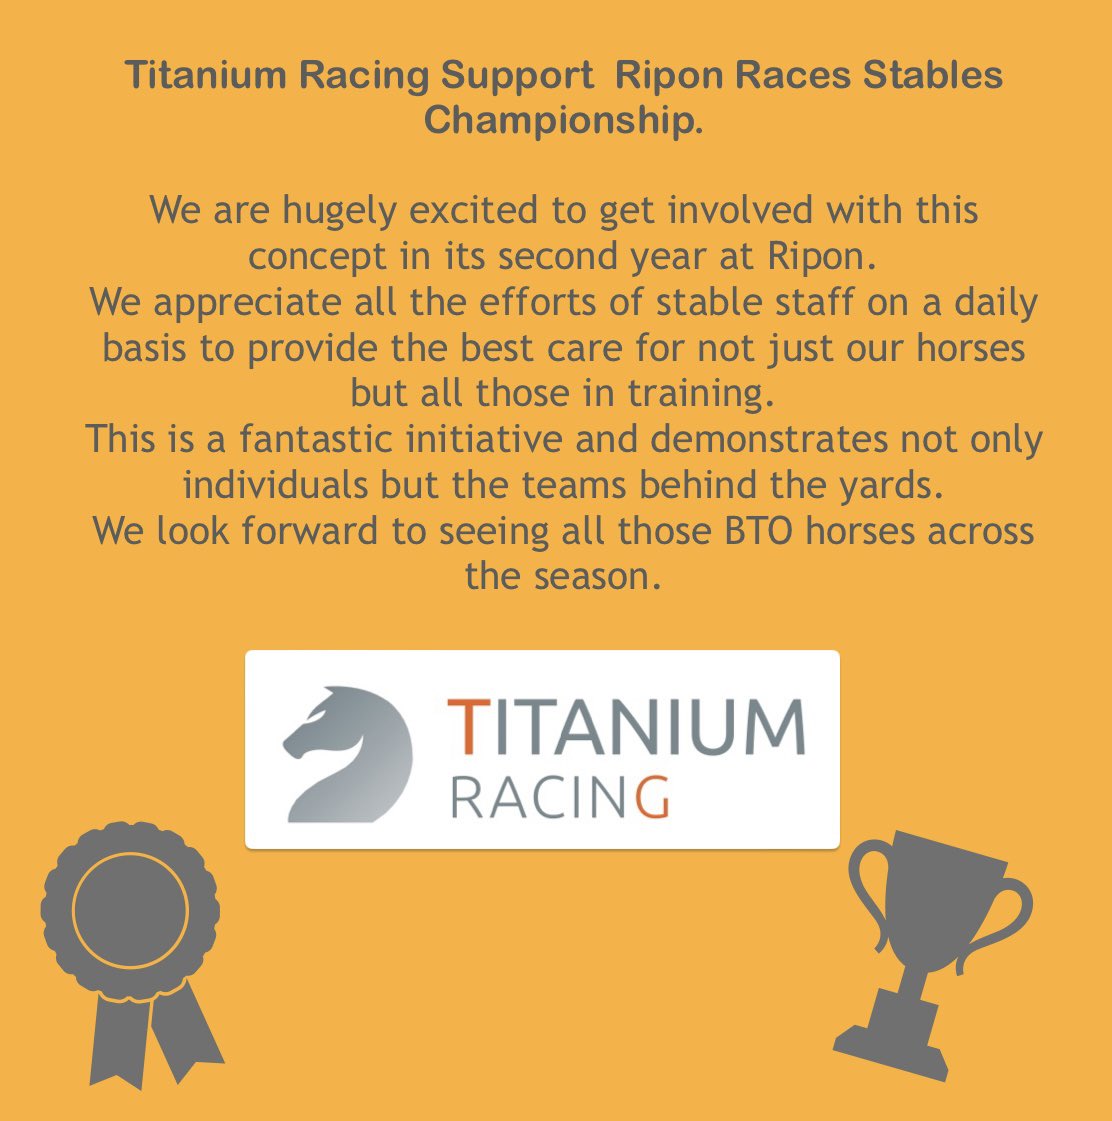 We are teaming up with @RiponRaces again. This year we are sponsoring the Award Winning Stables Championship, staff are an integral part of the sport & we appreciate all their hard work daily. This is a fantastic initiative from Ripon and one we were keen to get behind 🏆🥇.